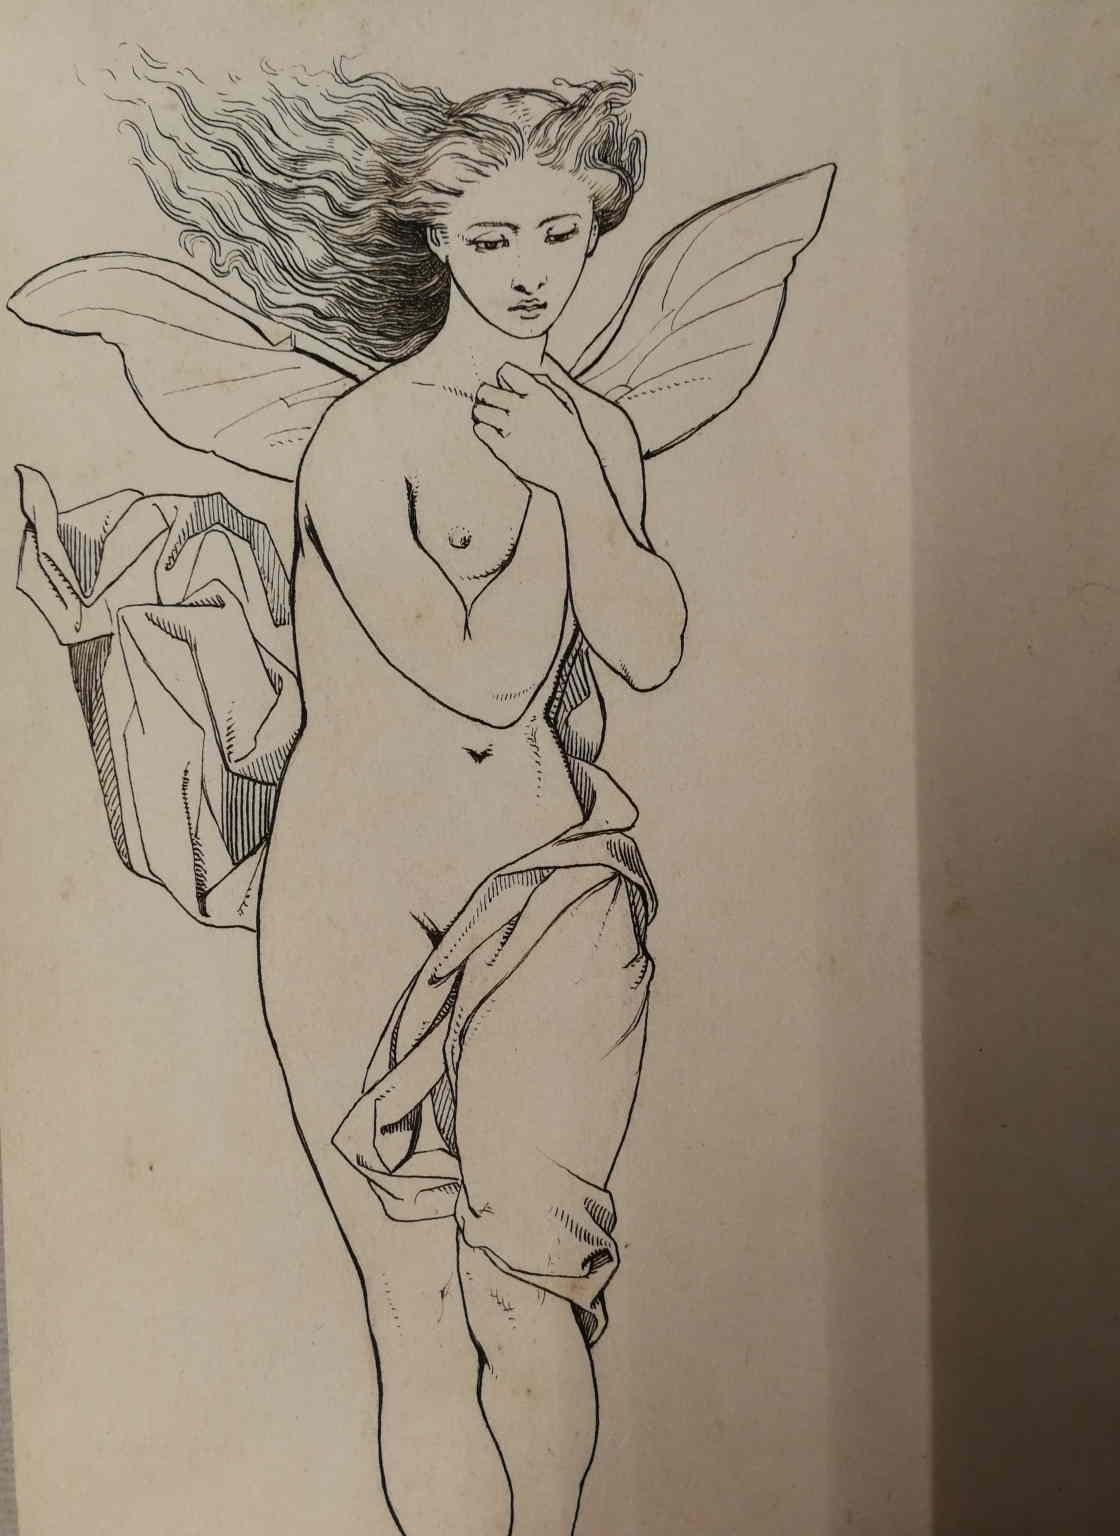 Giuseppe Calì, Psyche, end 19th-early 20th, ink on paper, signed 2